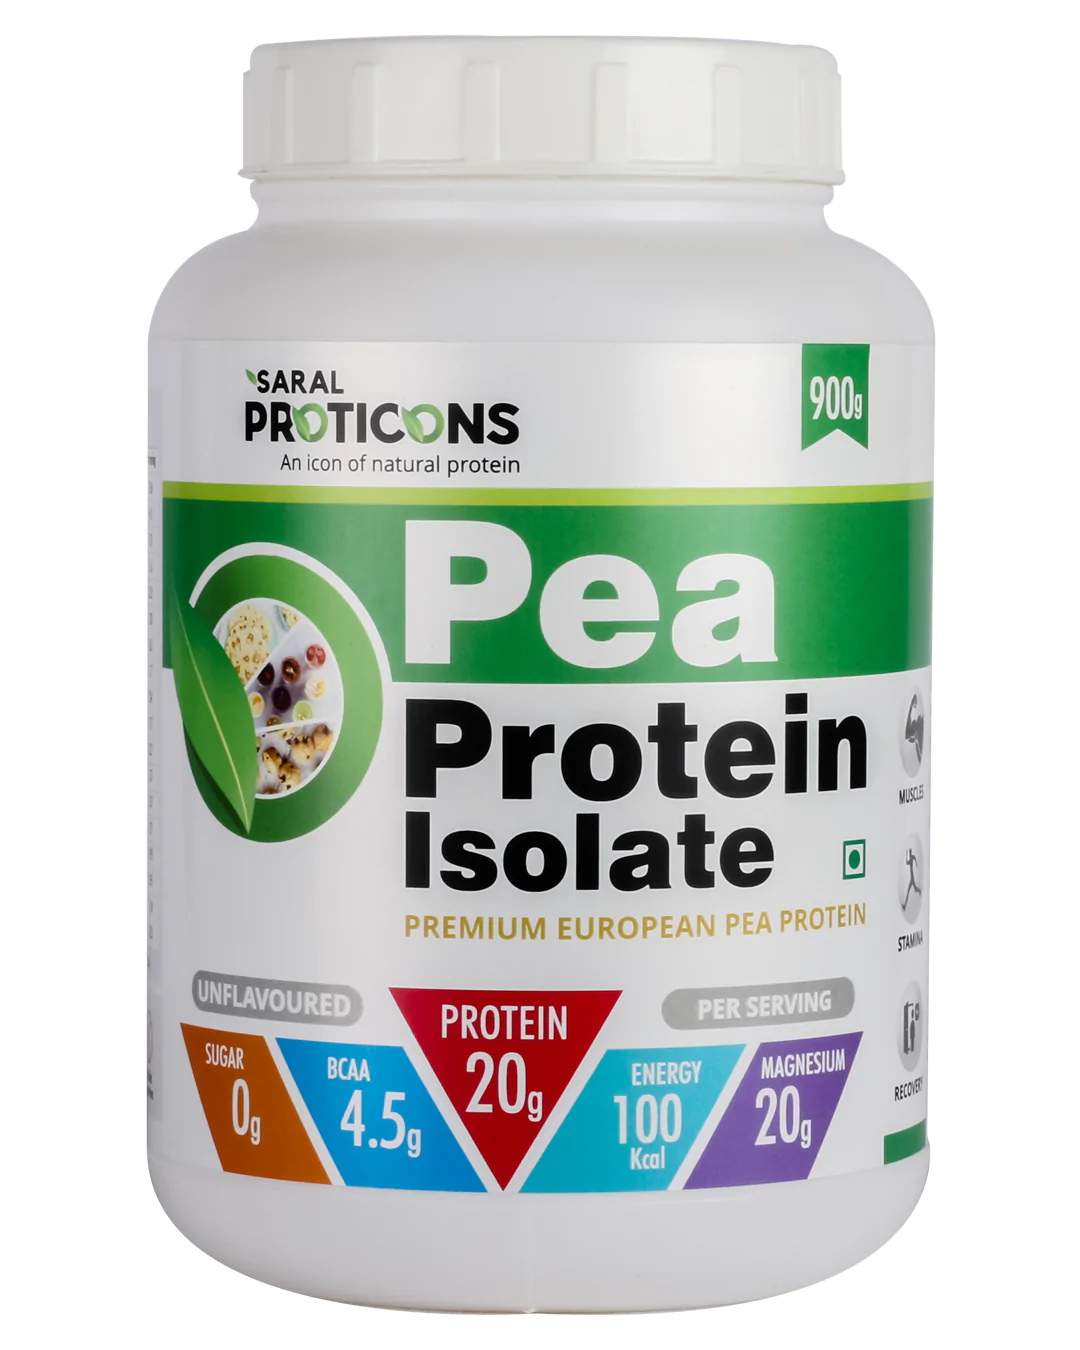 Saral Proticons Pea Protein Isolate Image